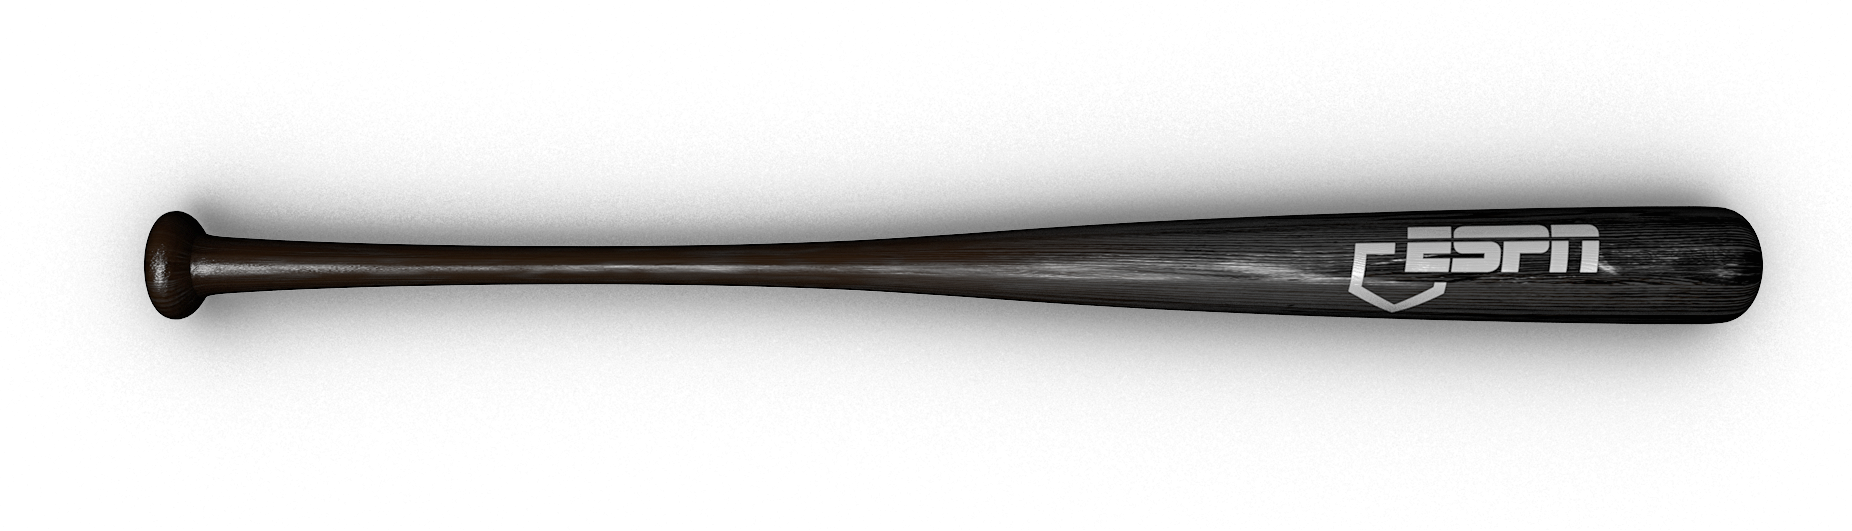 A black wooden bat with the ESPN logo on it